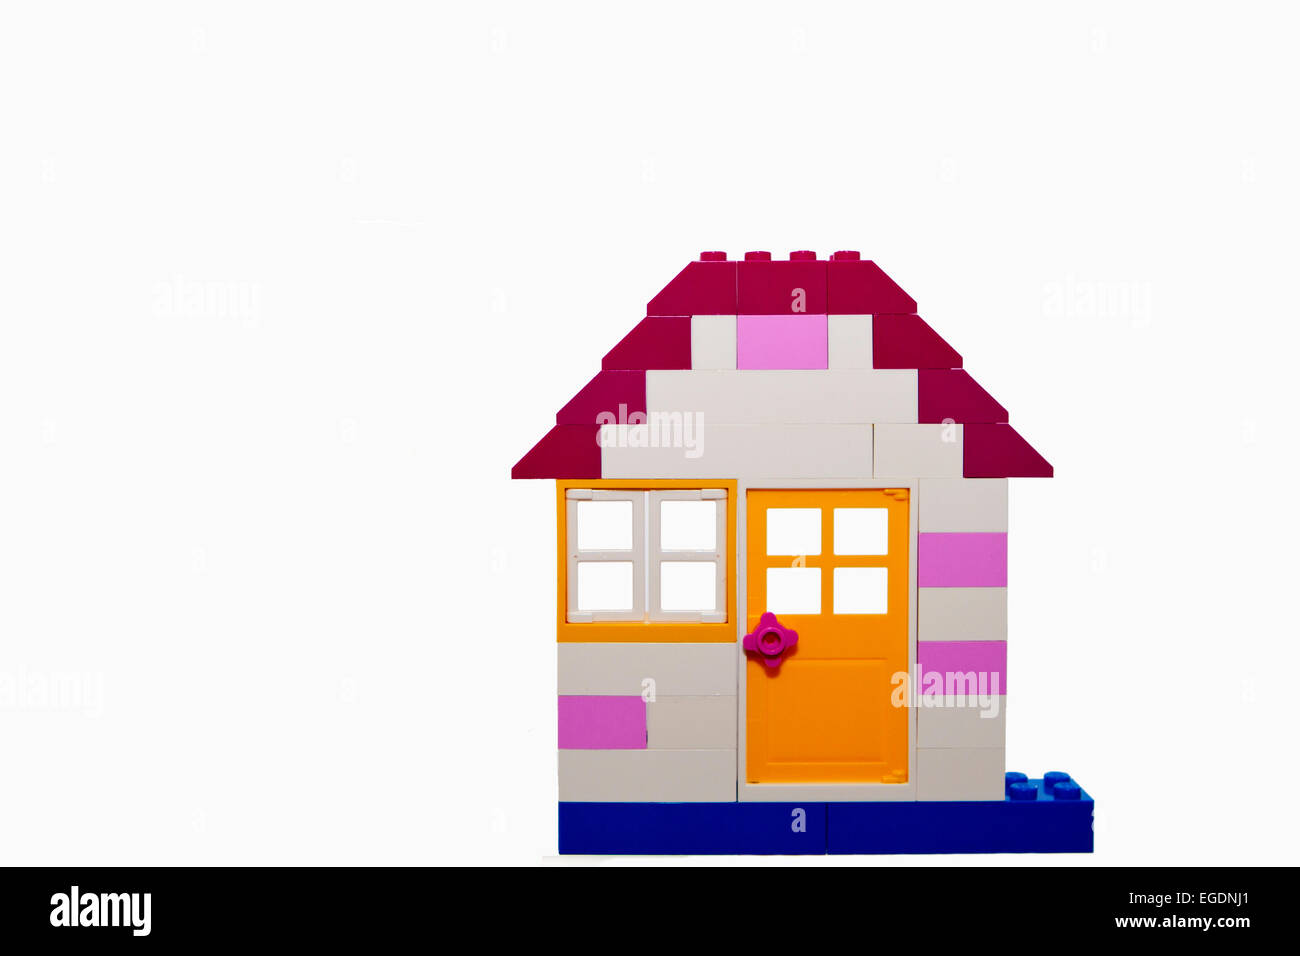 Lego House High Resolution Stock Photography and Images - Alamy